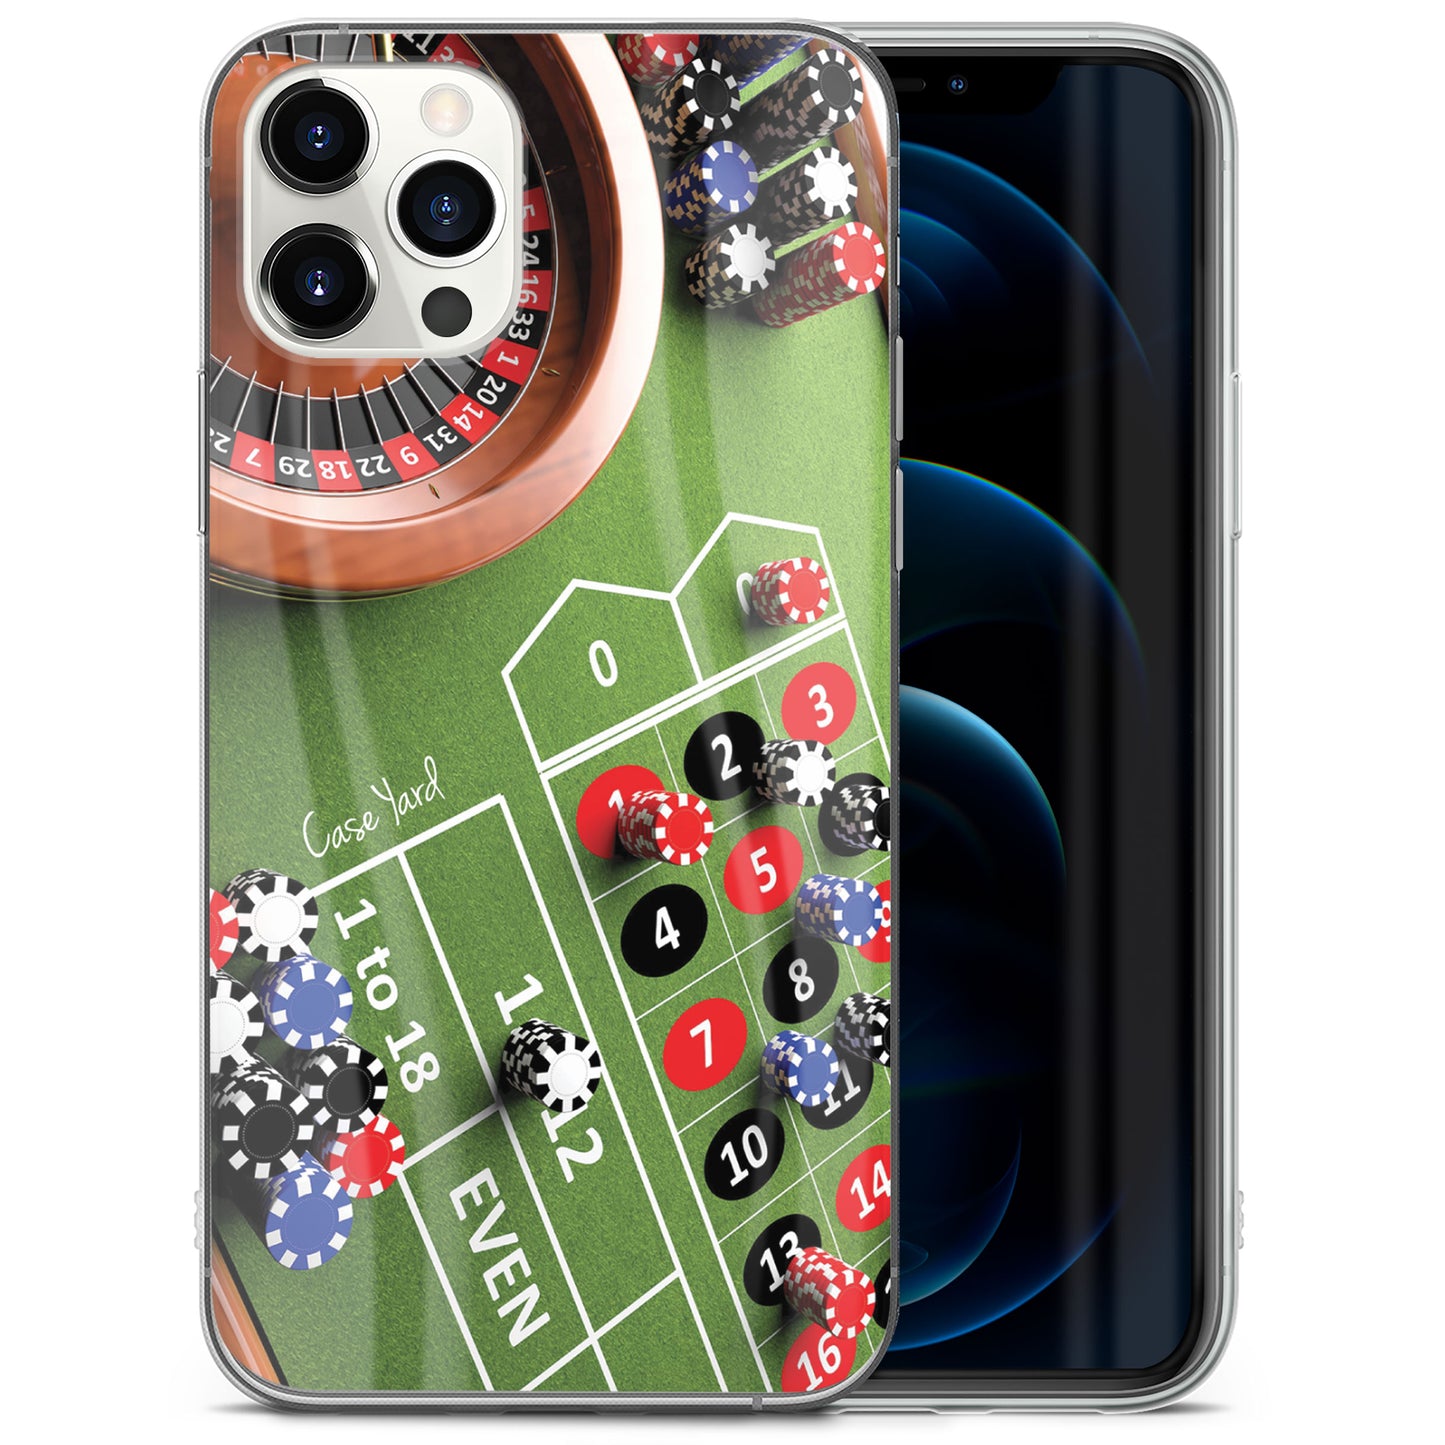 TPU Case Clear case with (Roulette & Chips) Design for iPhone & Samsung Phones